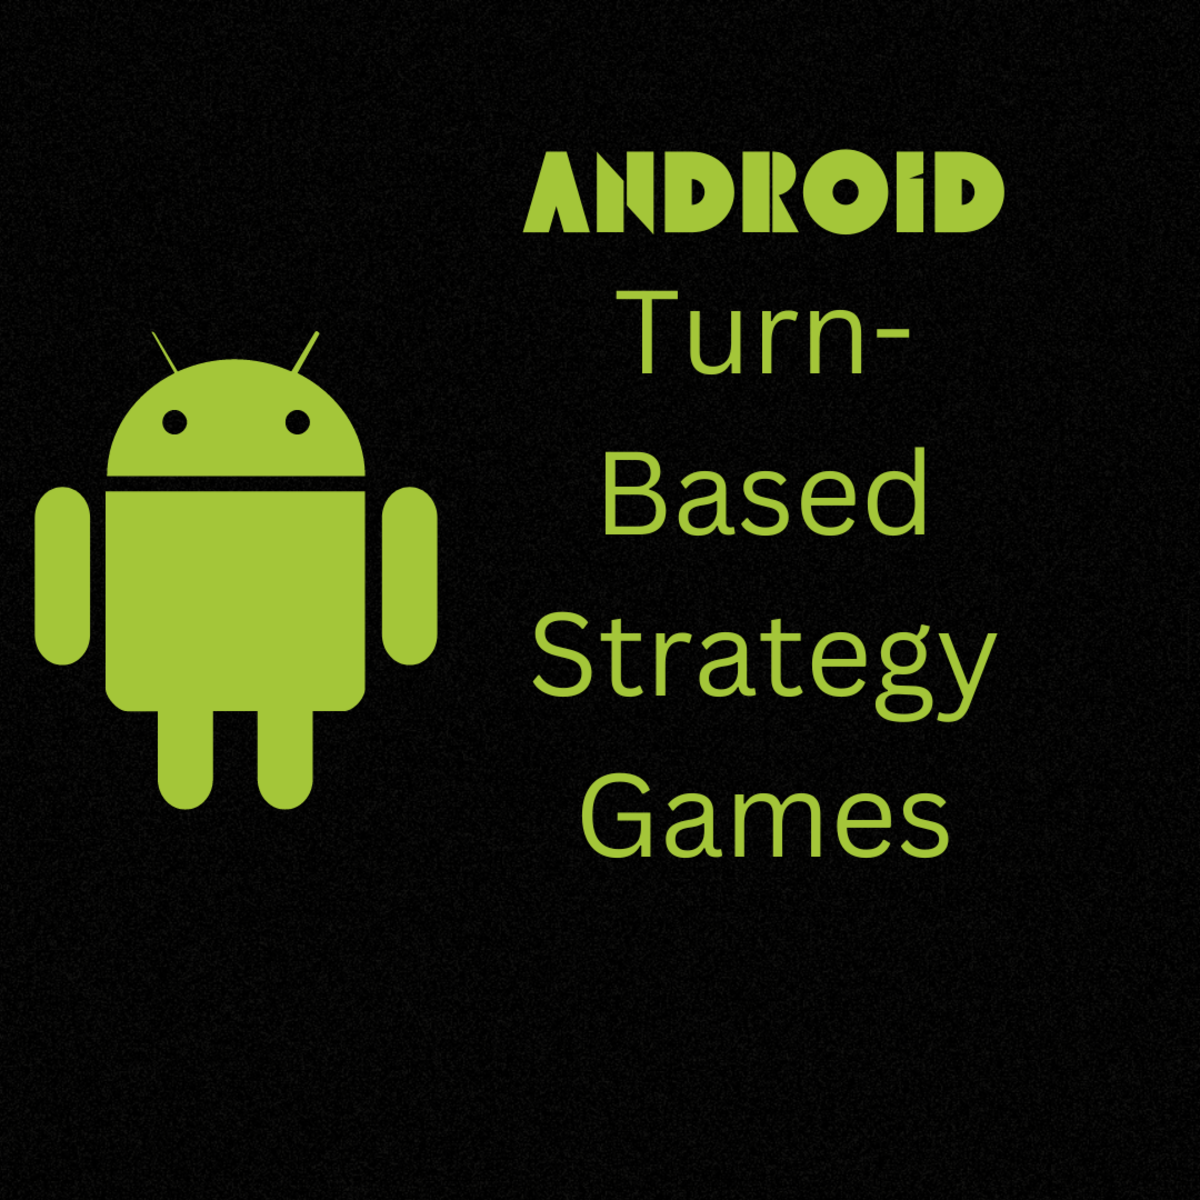 6 Turn-Based Strategy Games for Android